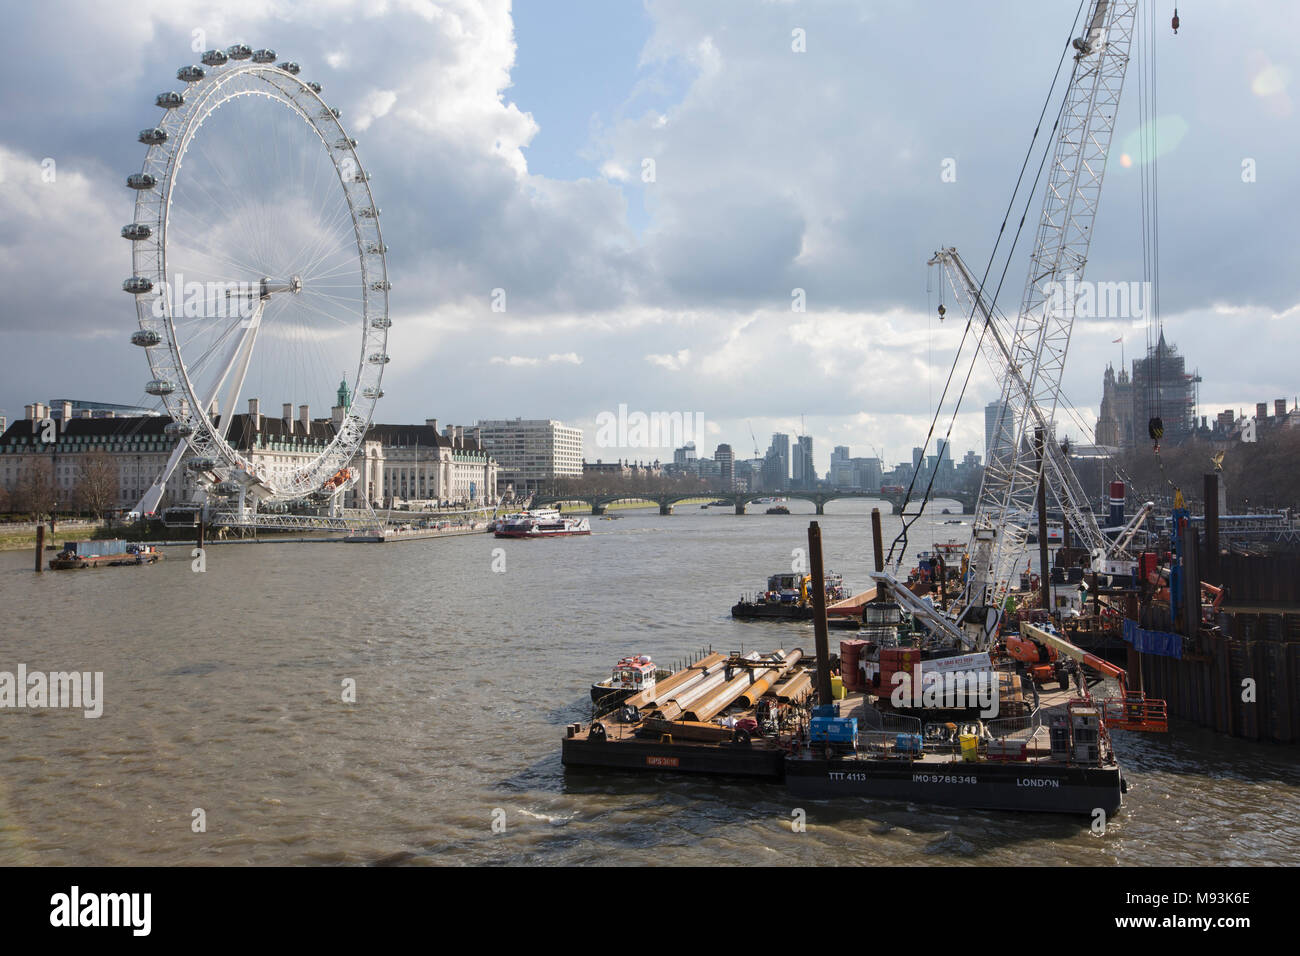 Building works on the Thames northbank, with the London Eye in the distance, central London, England, UK Stock Photo